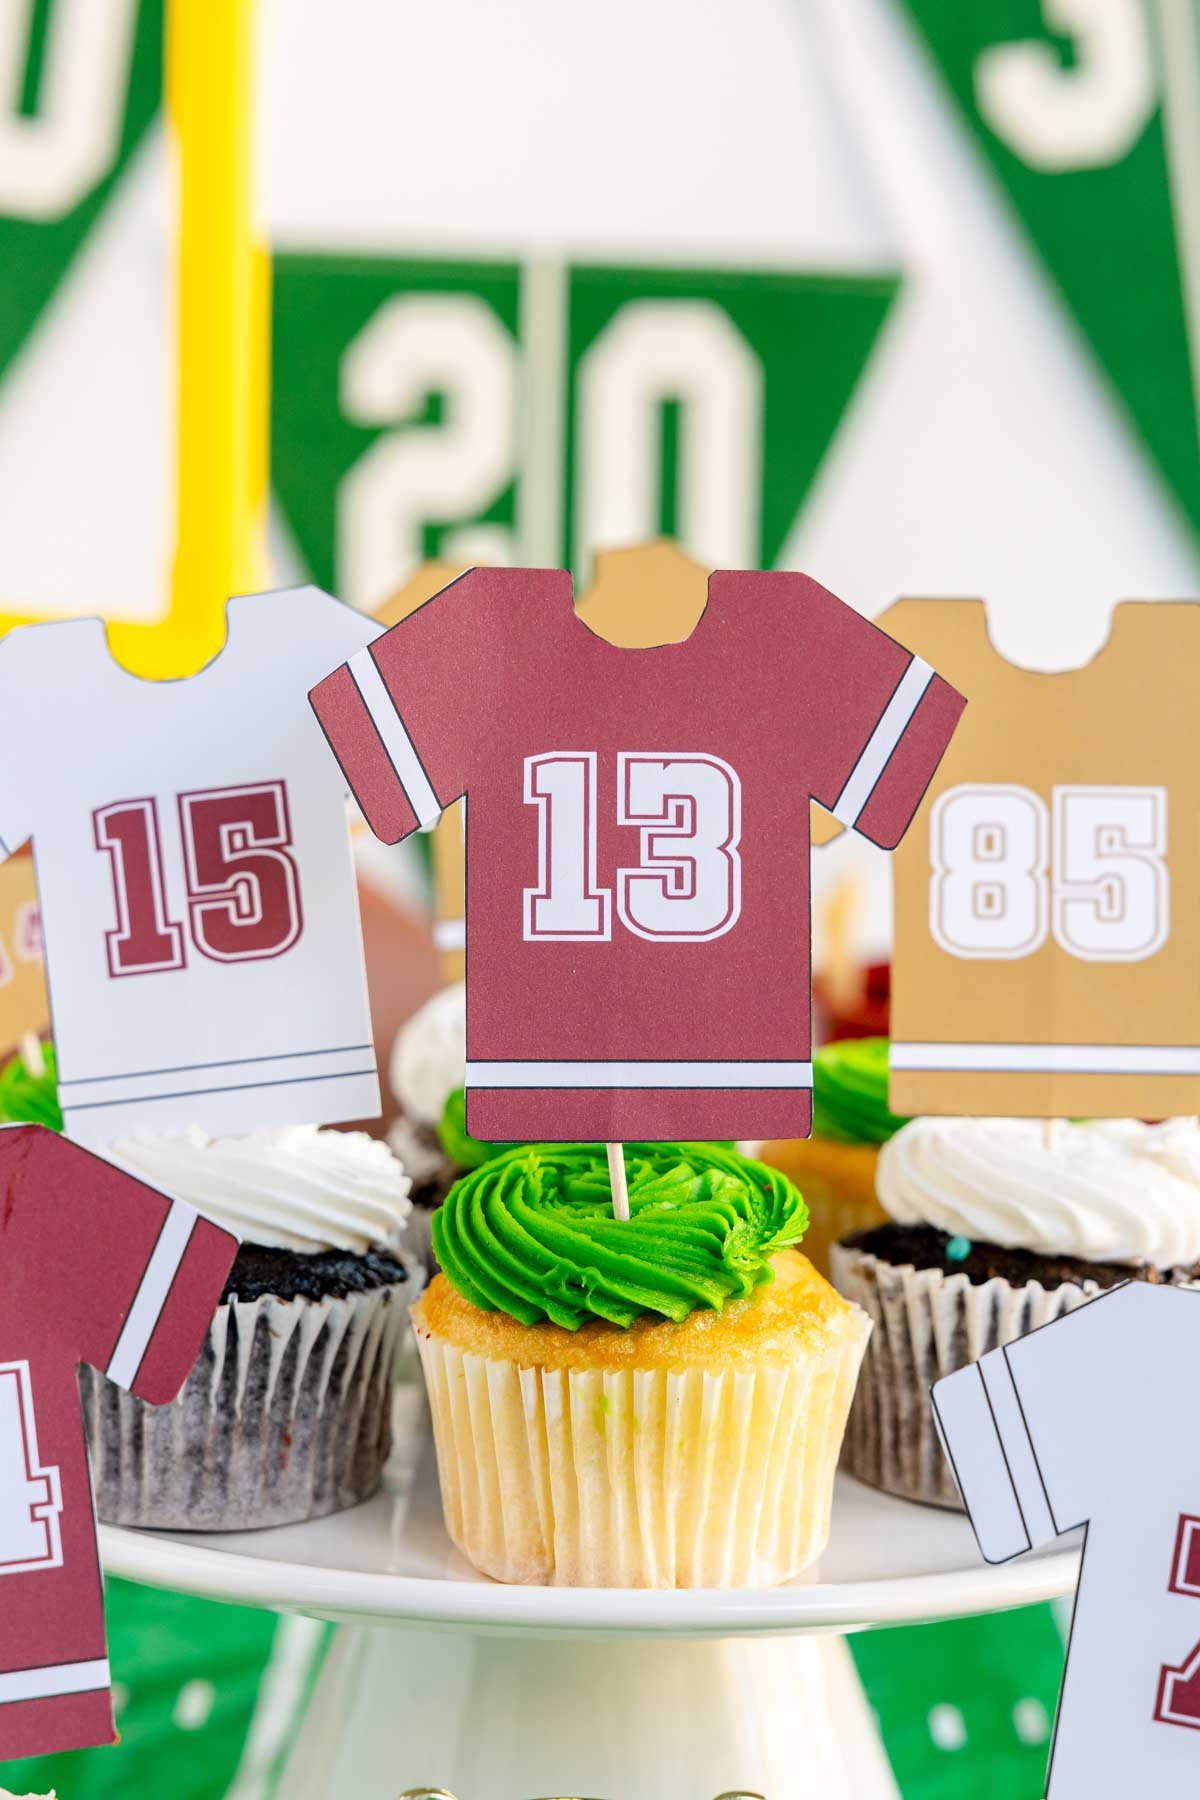 49ers party printables in cupcakes